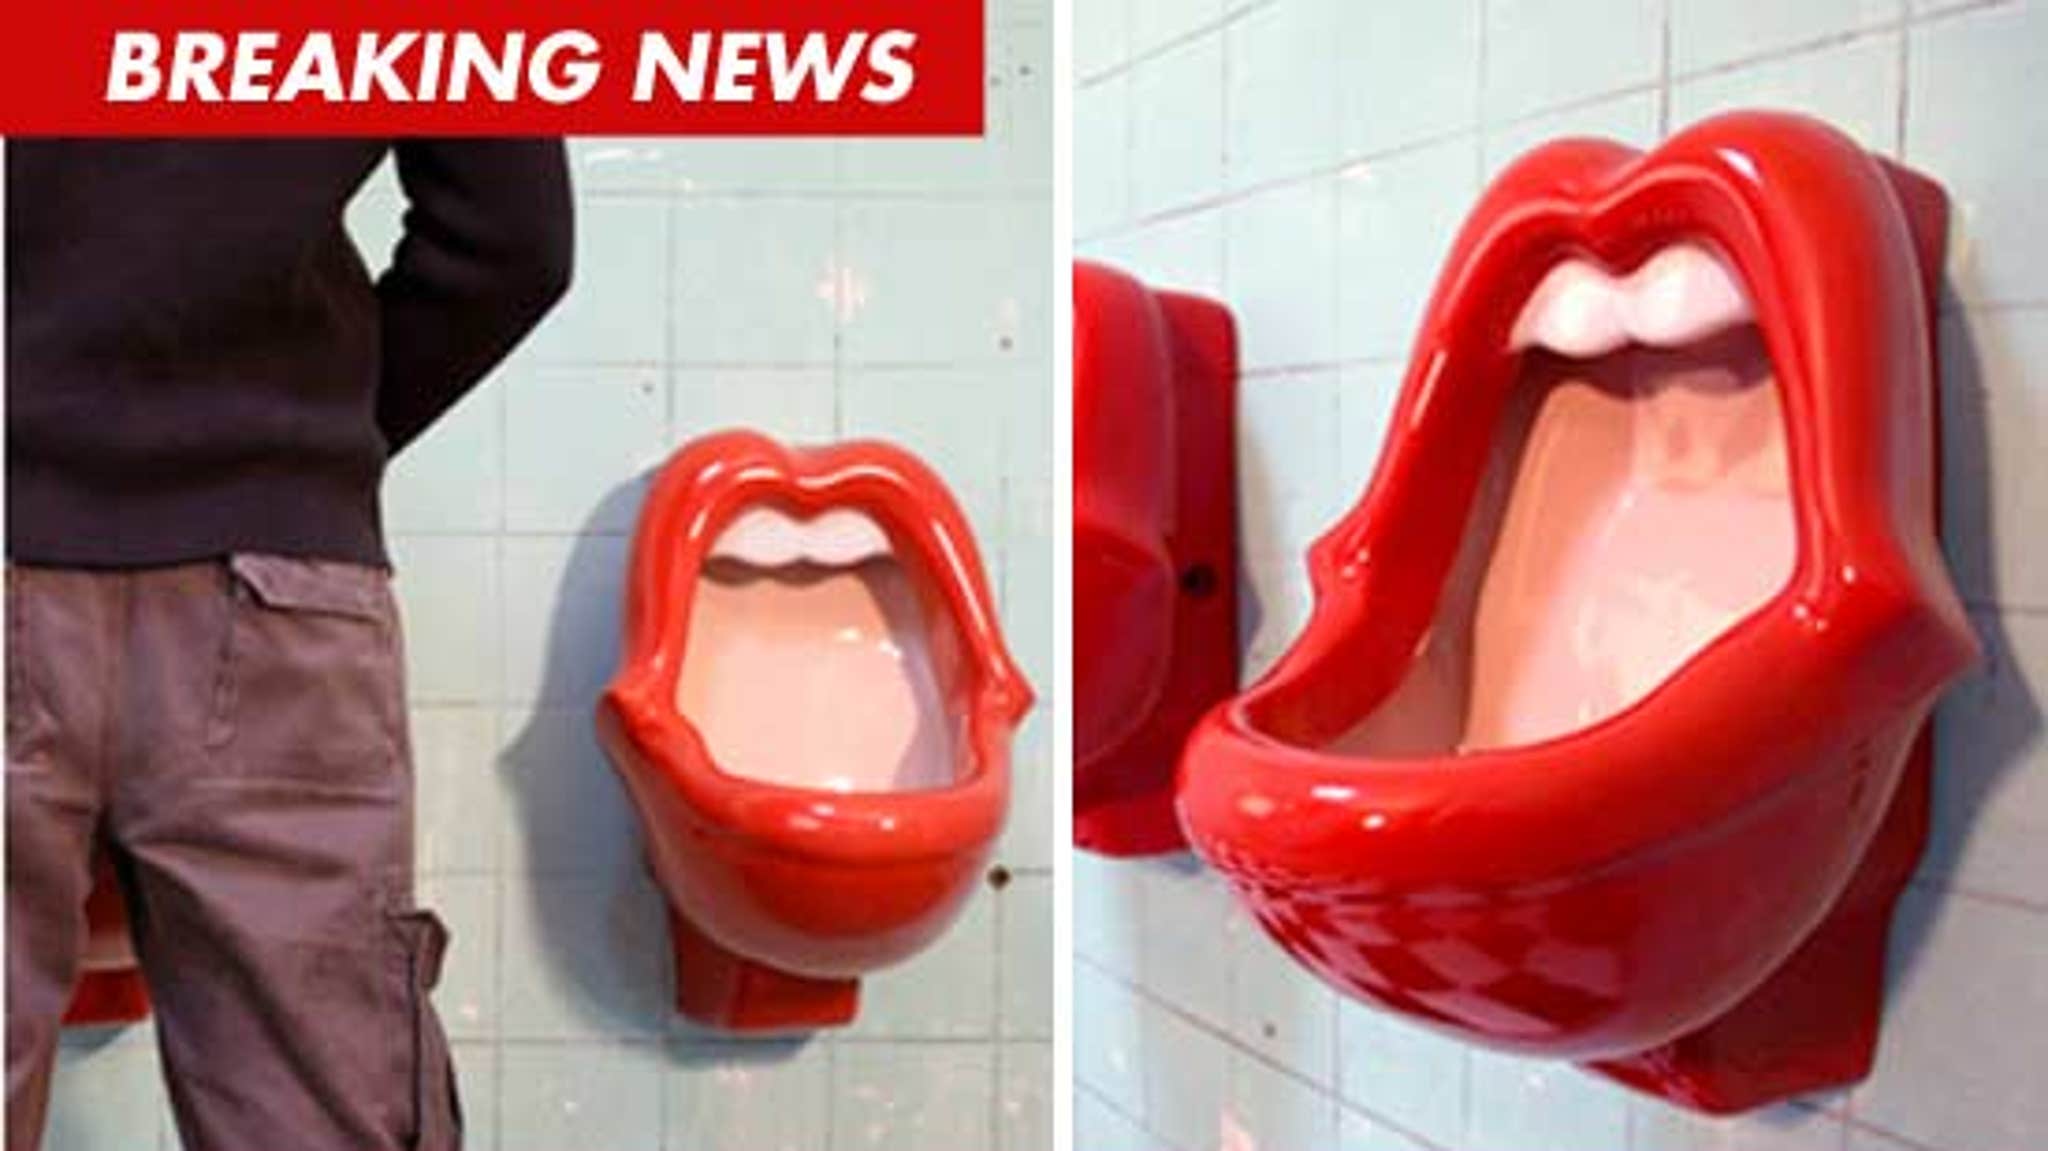 Feminists see red over urinals like open mouths